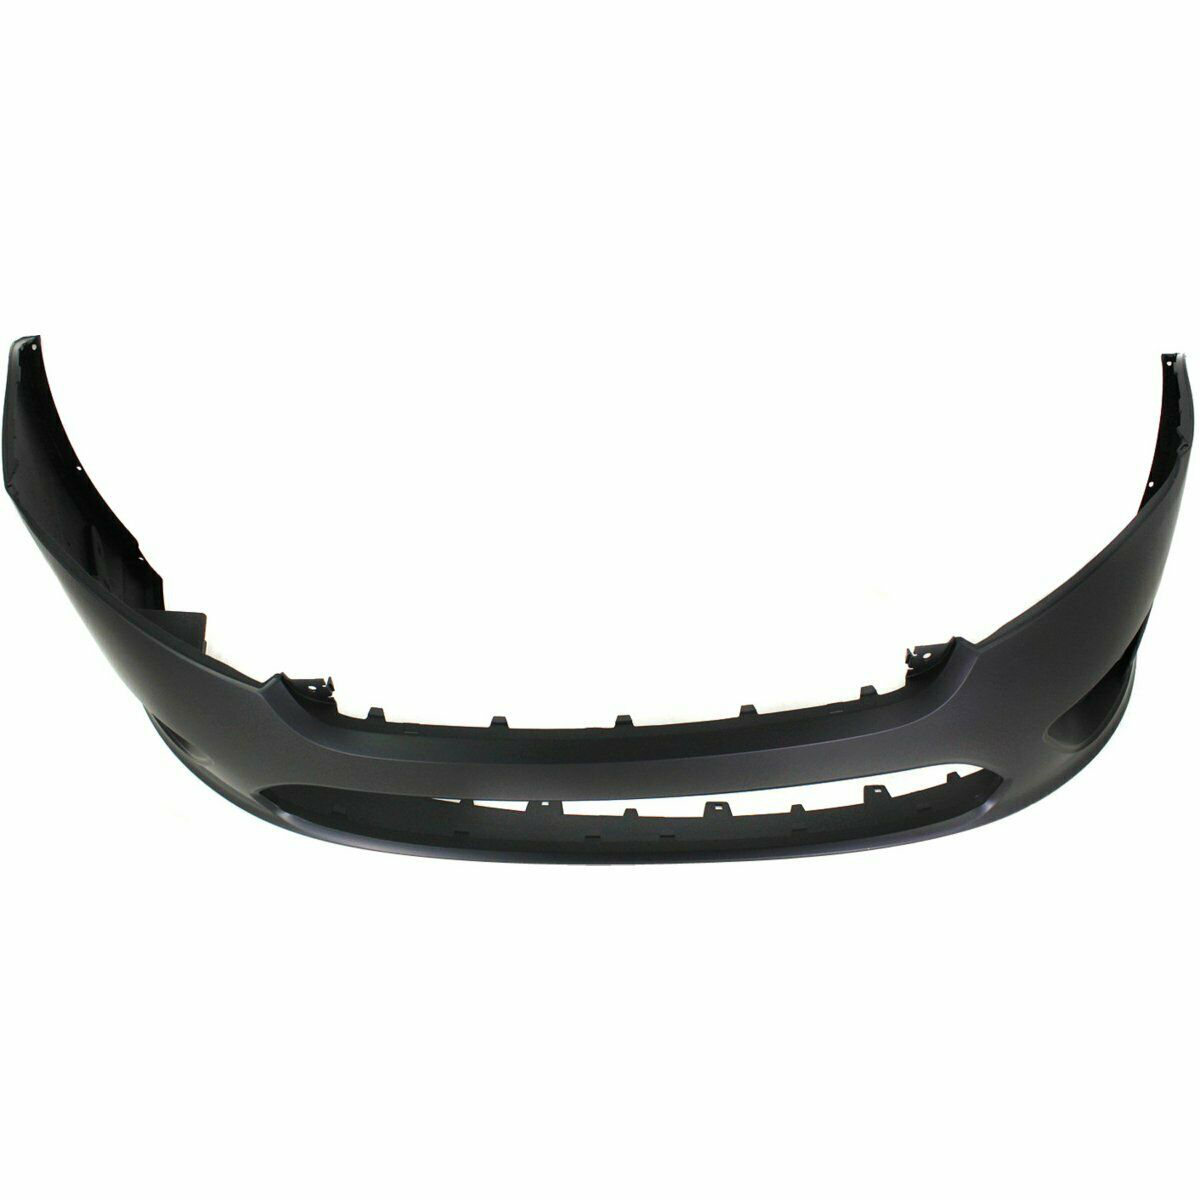 2010-2012 Ford Fusion Front Bumper Painted to Match